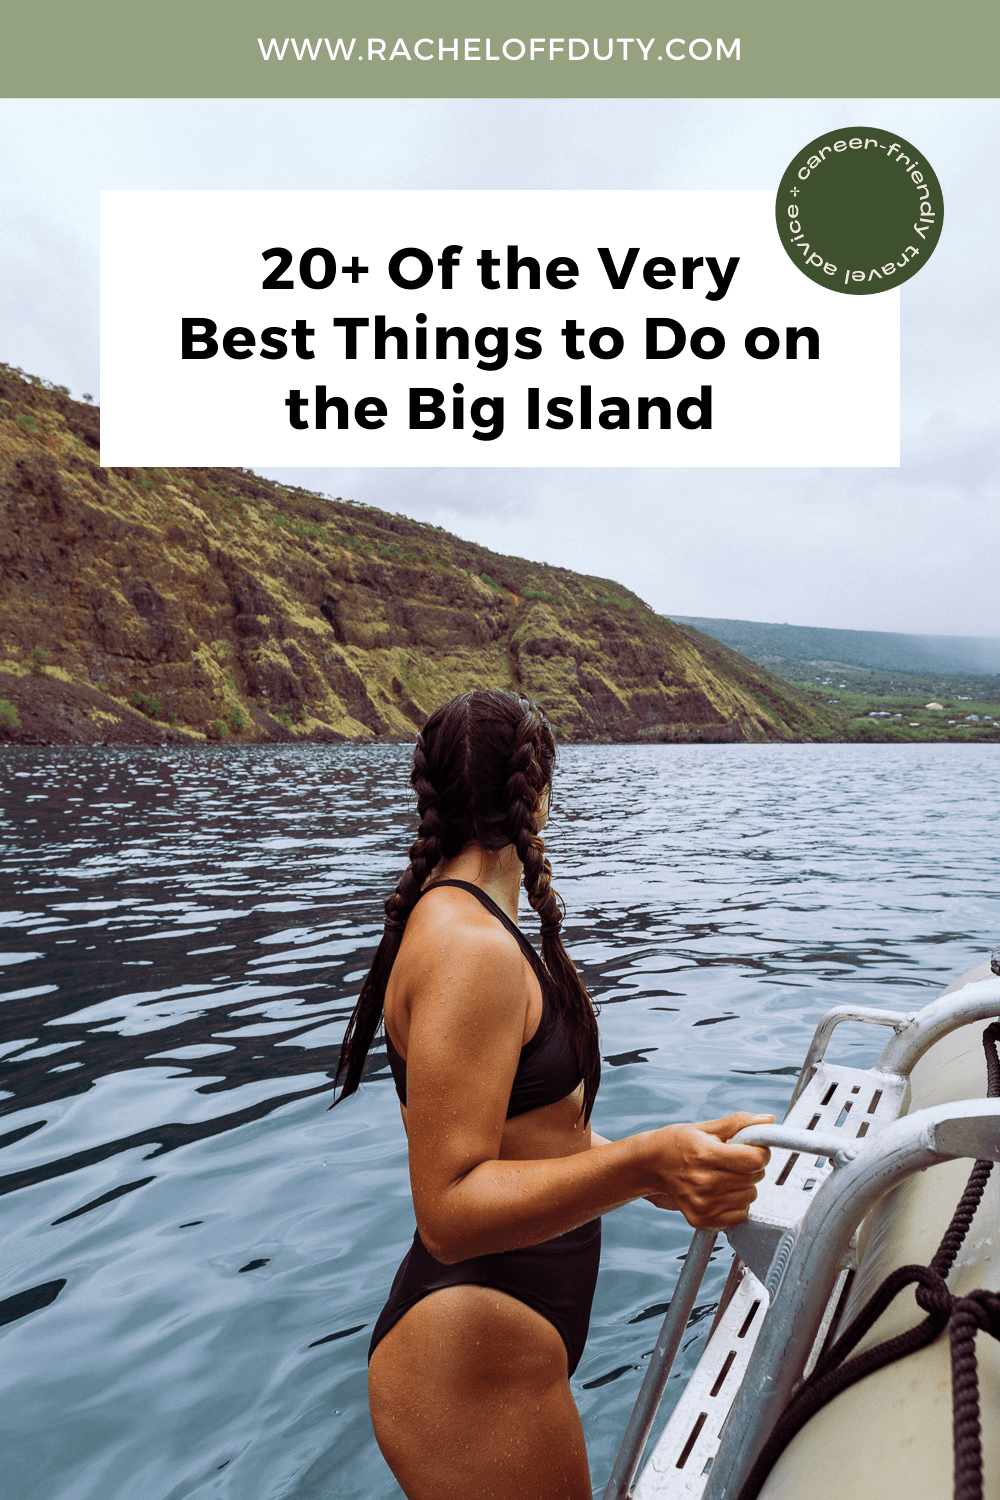 Rachel Off Duty: The Best Things to Do on the Big Island